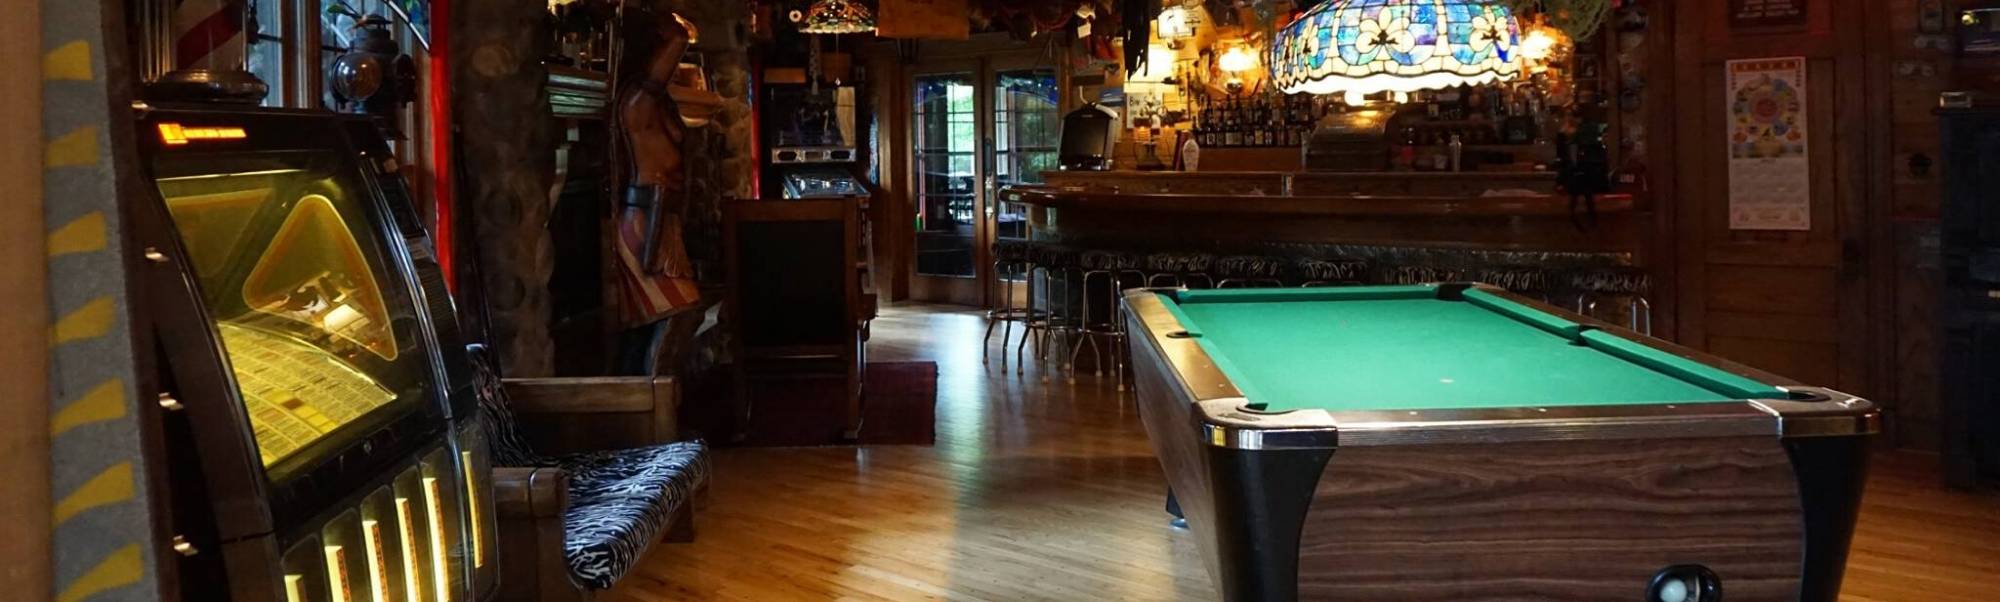 wisconsin cabins with hot tub and pool table near me ...